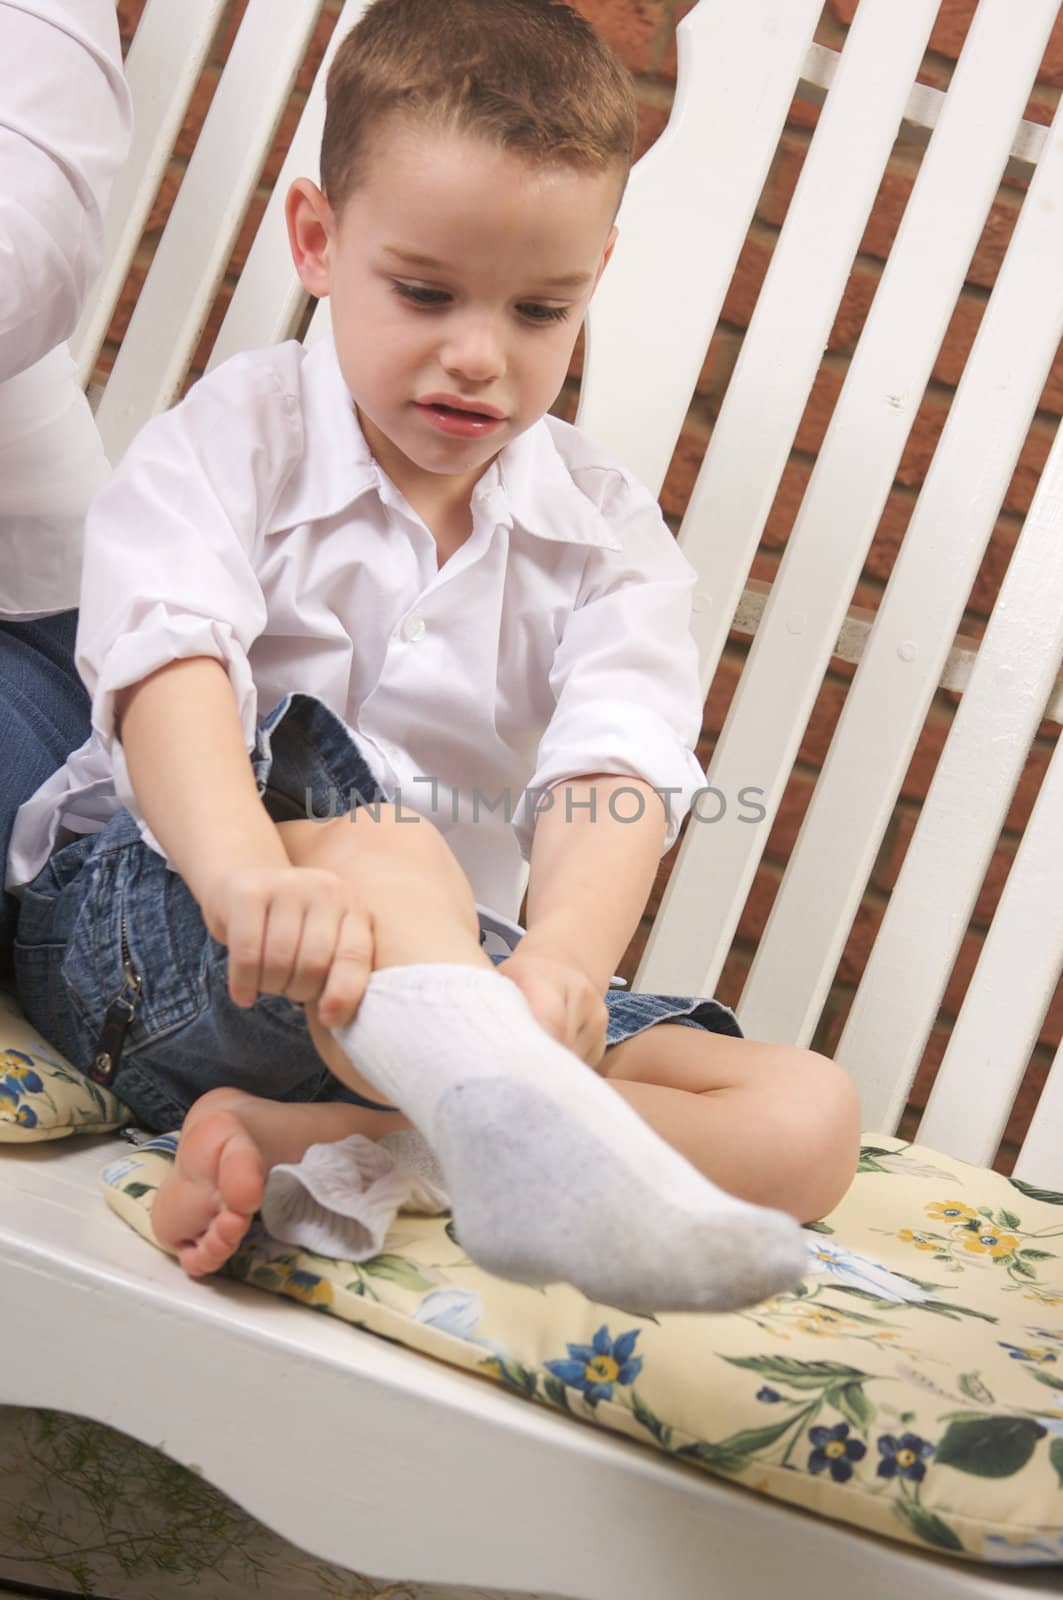 Adorable Young Boy Getting Dressed Putting His Socks On